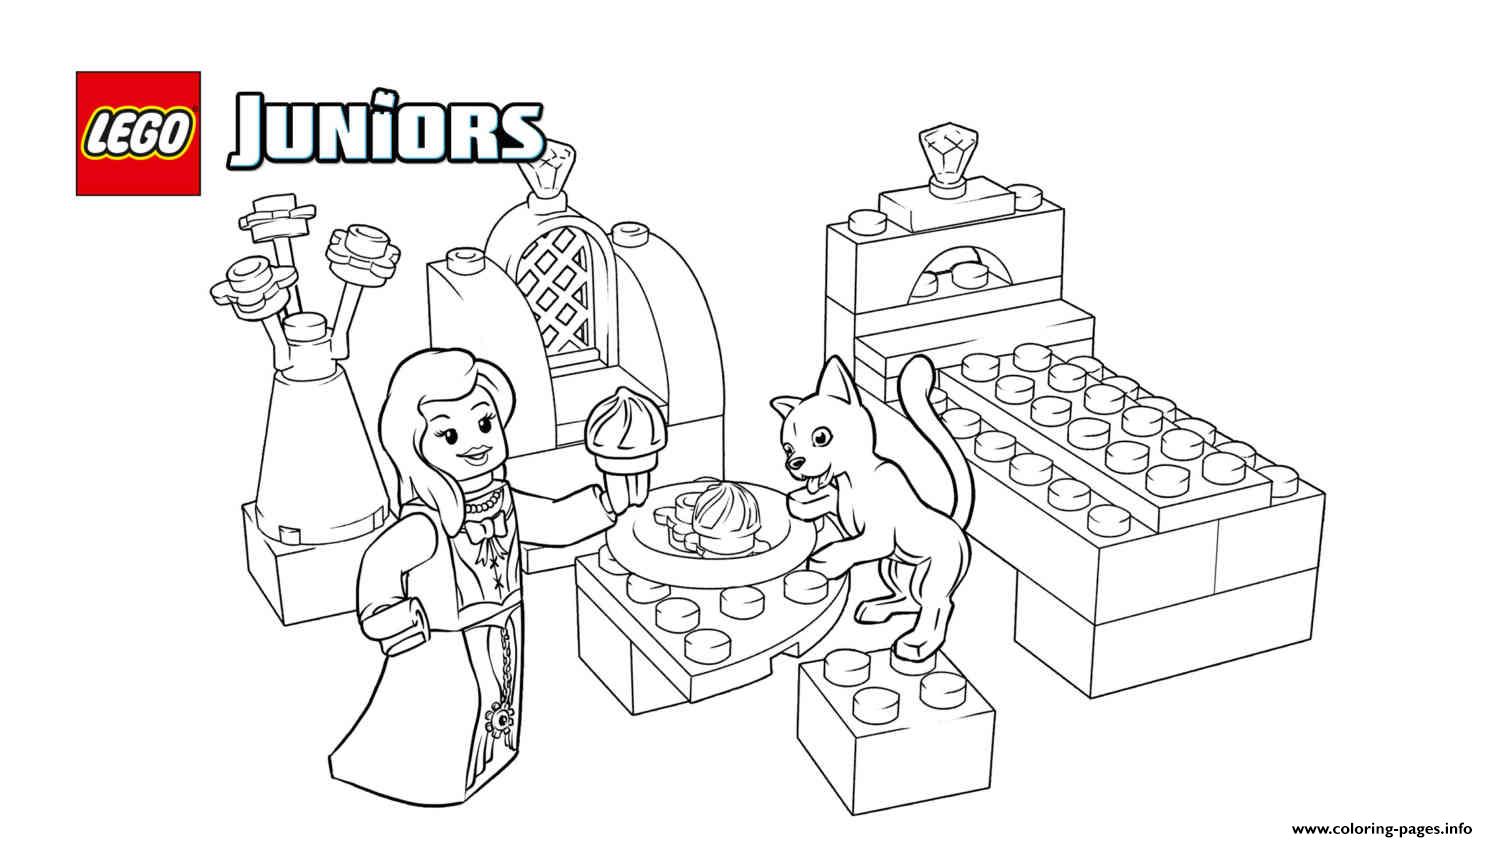 Lego Juniors Princess Play With Pets coloring